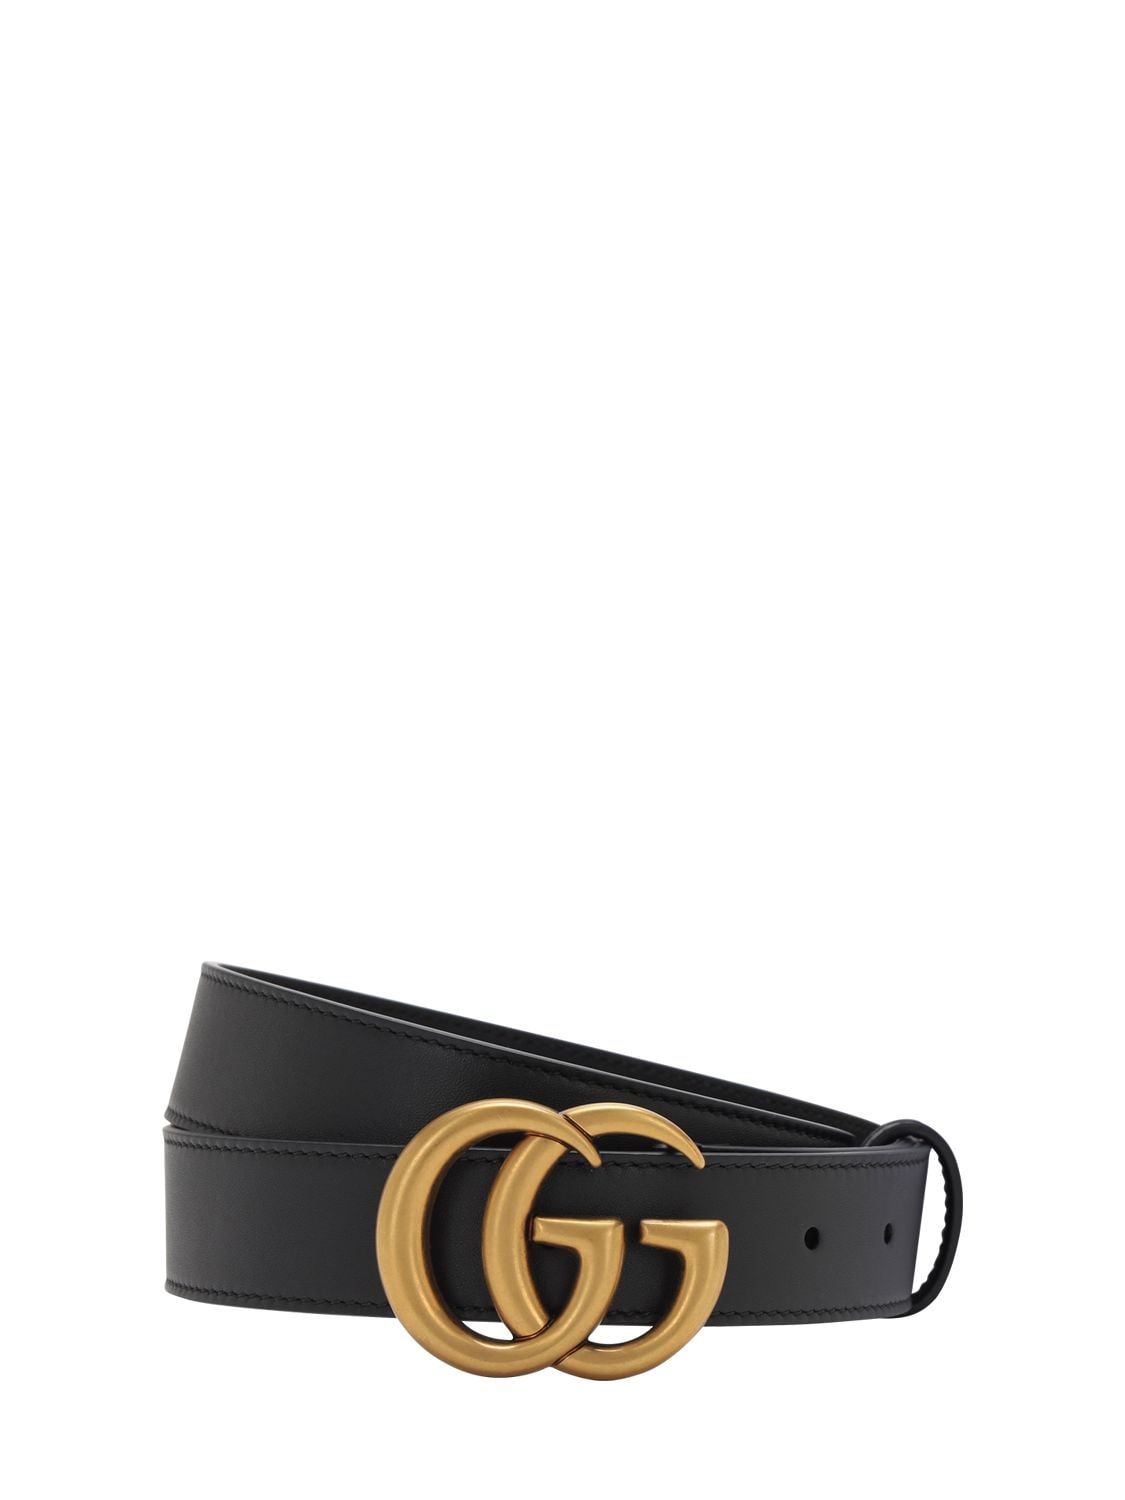 Image of 3cm Gg Gold Buckle Leather Belt